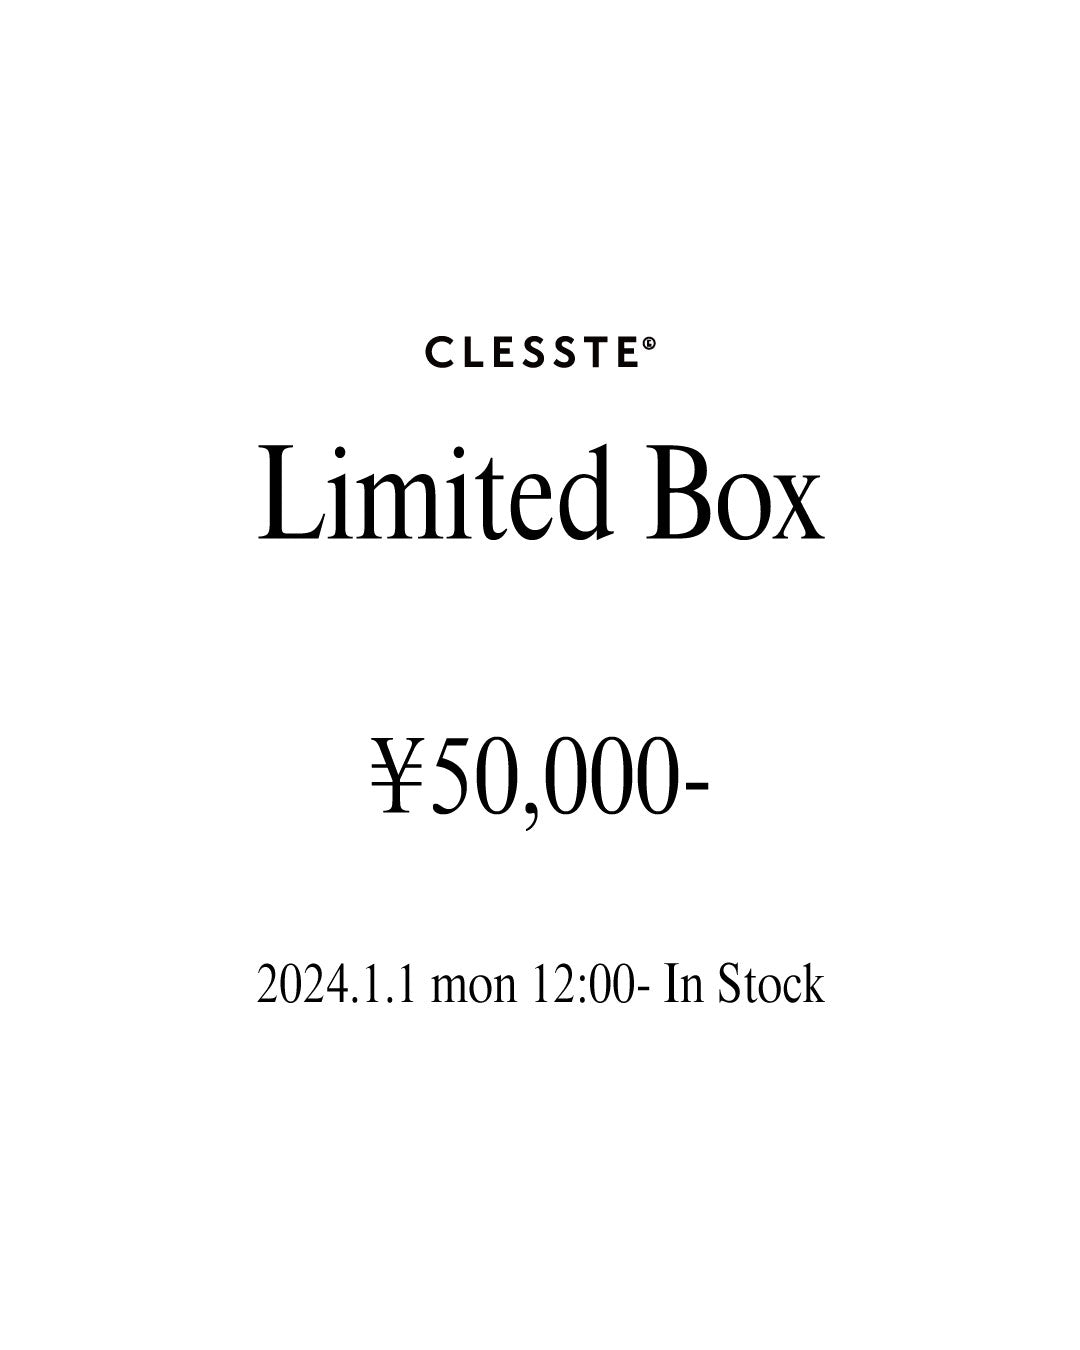 【2024.1.1 mon 12:00- In Stock】 Limited Box ¥50,000.